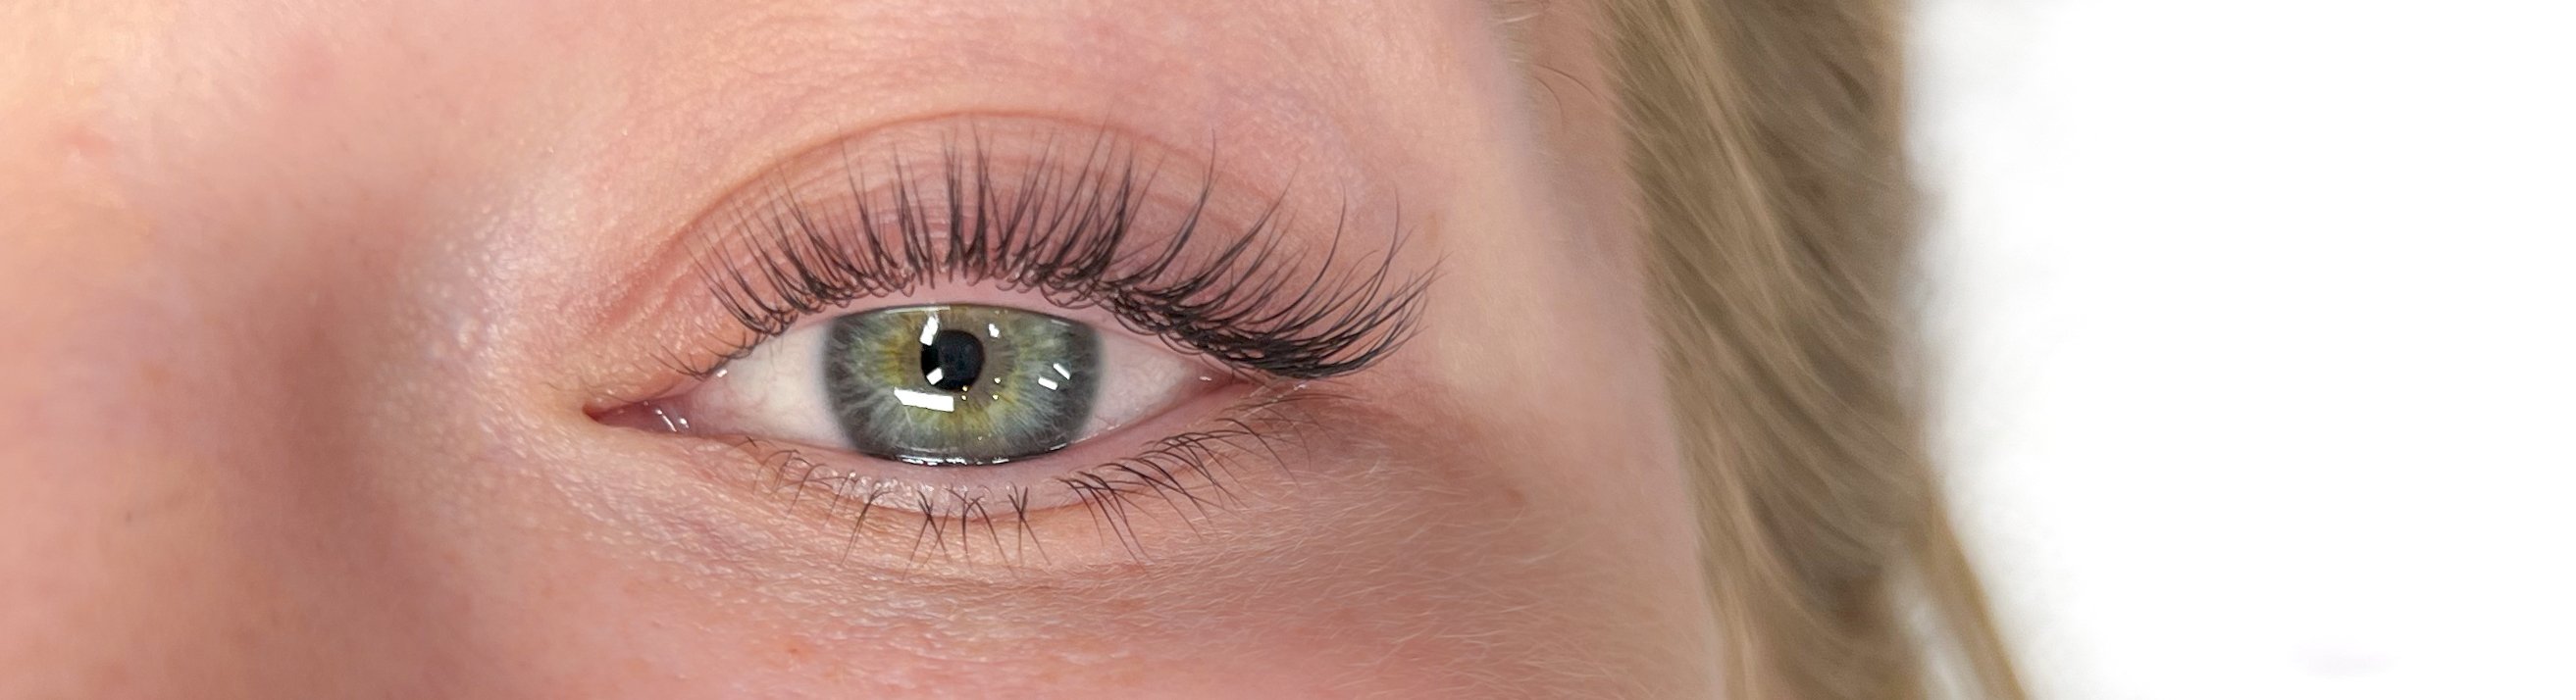 Lashes which have been treated with NORLASH lash lift products